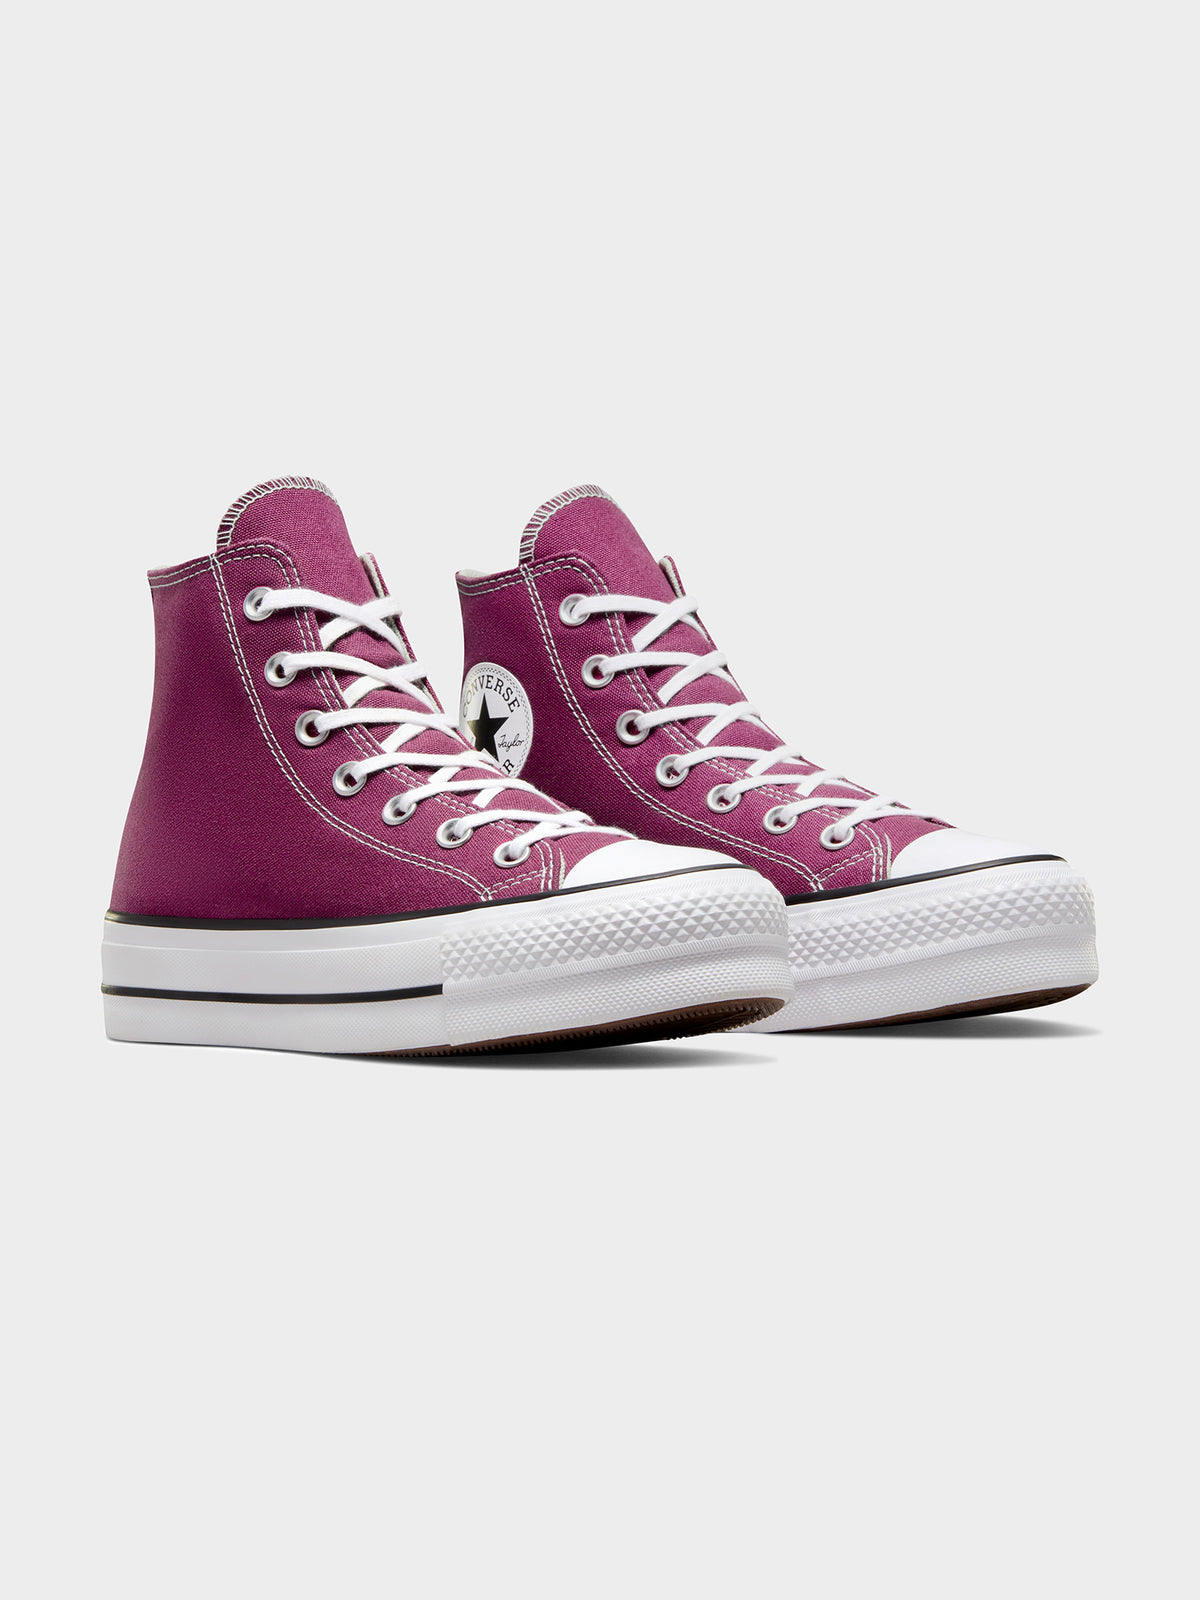 Womens Chuck Taylor All Star Lift High Top Sneakers in Legend Berry